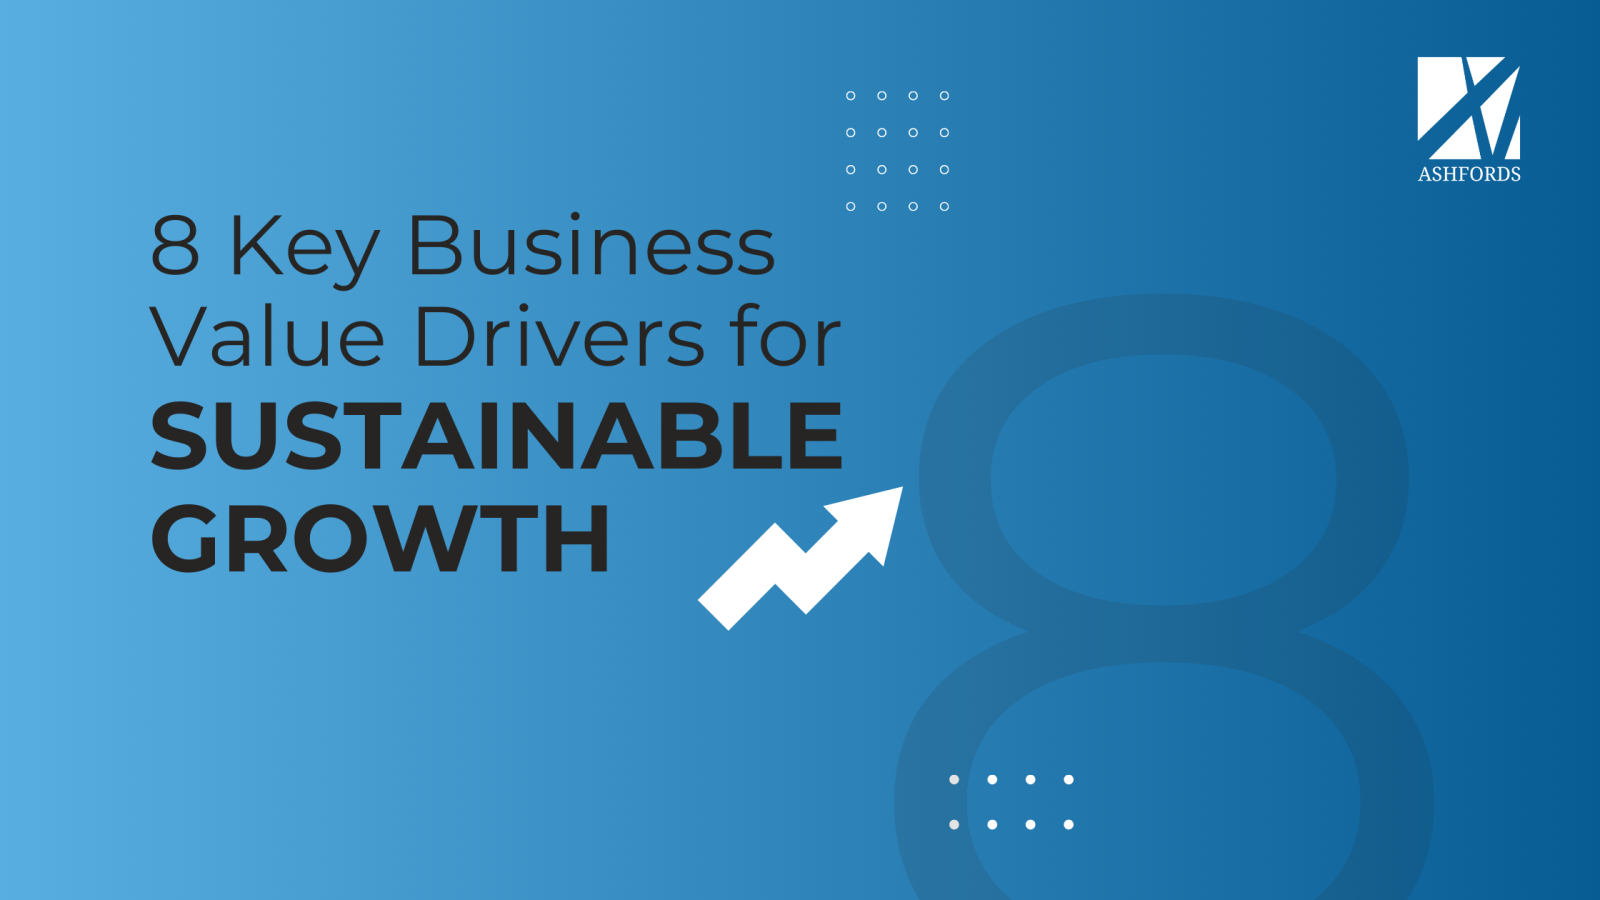 8 Key Business Value Drivers for Sustainable Growth